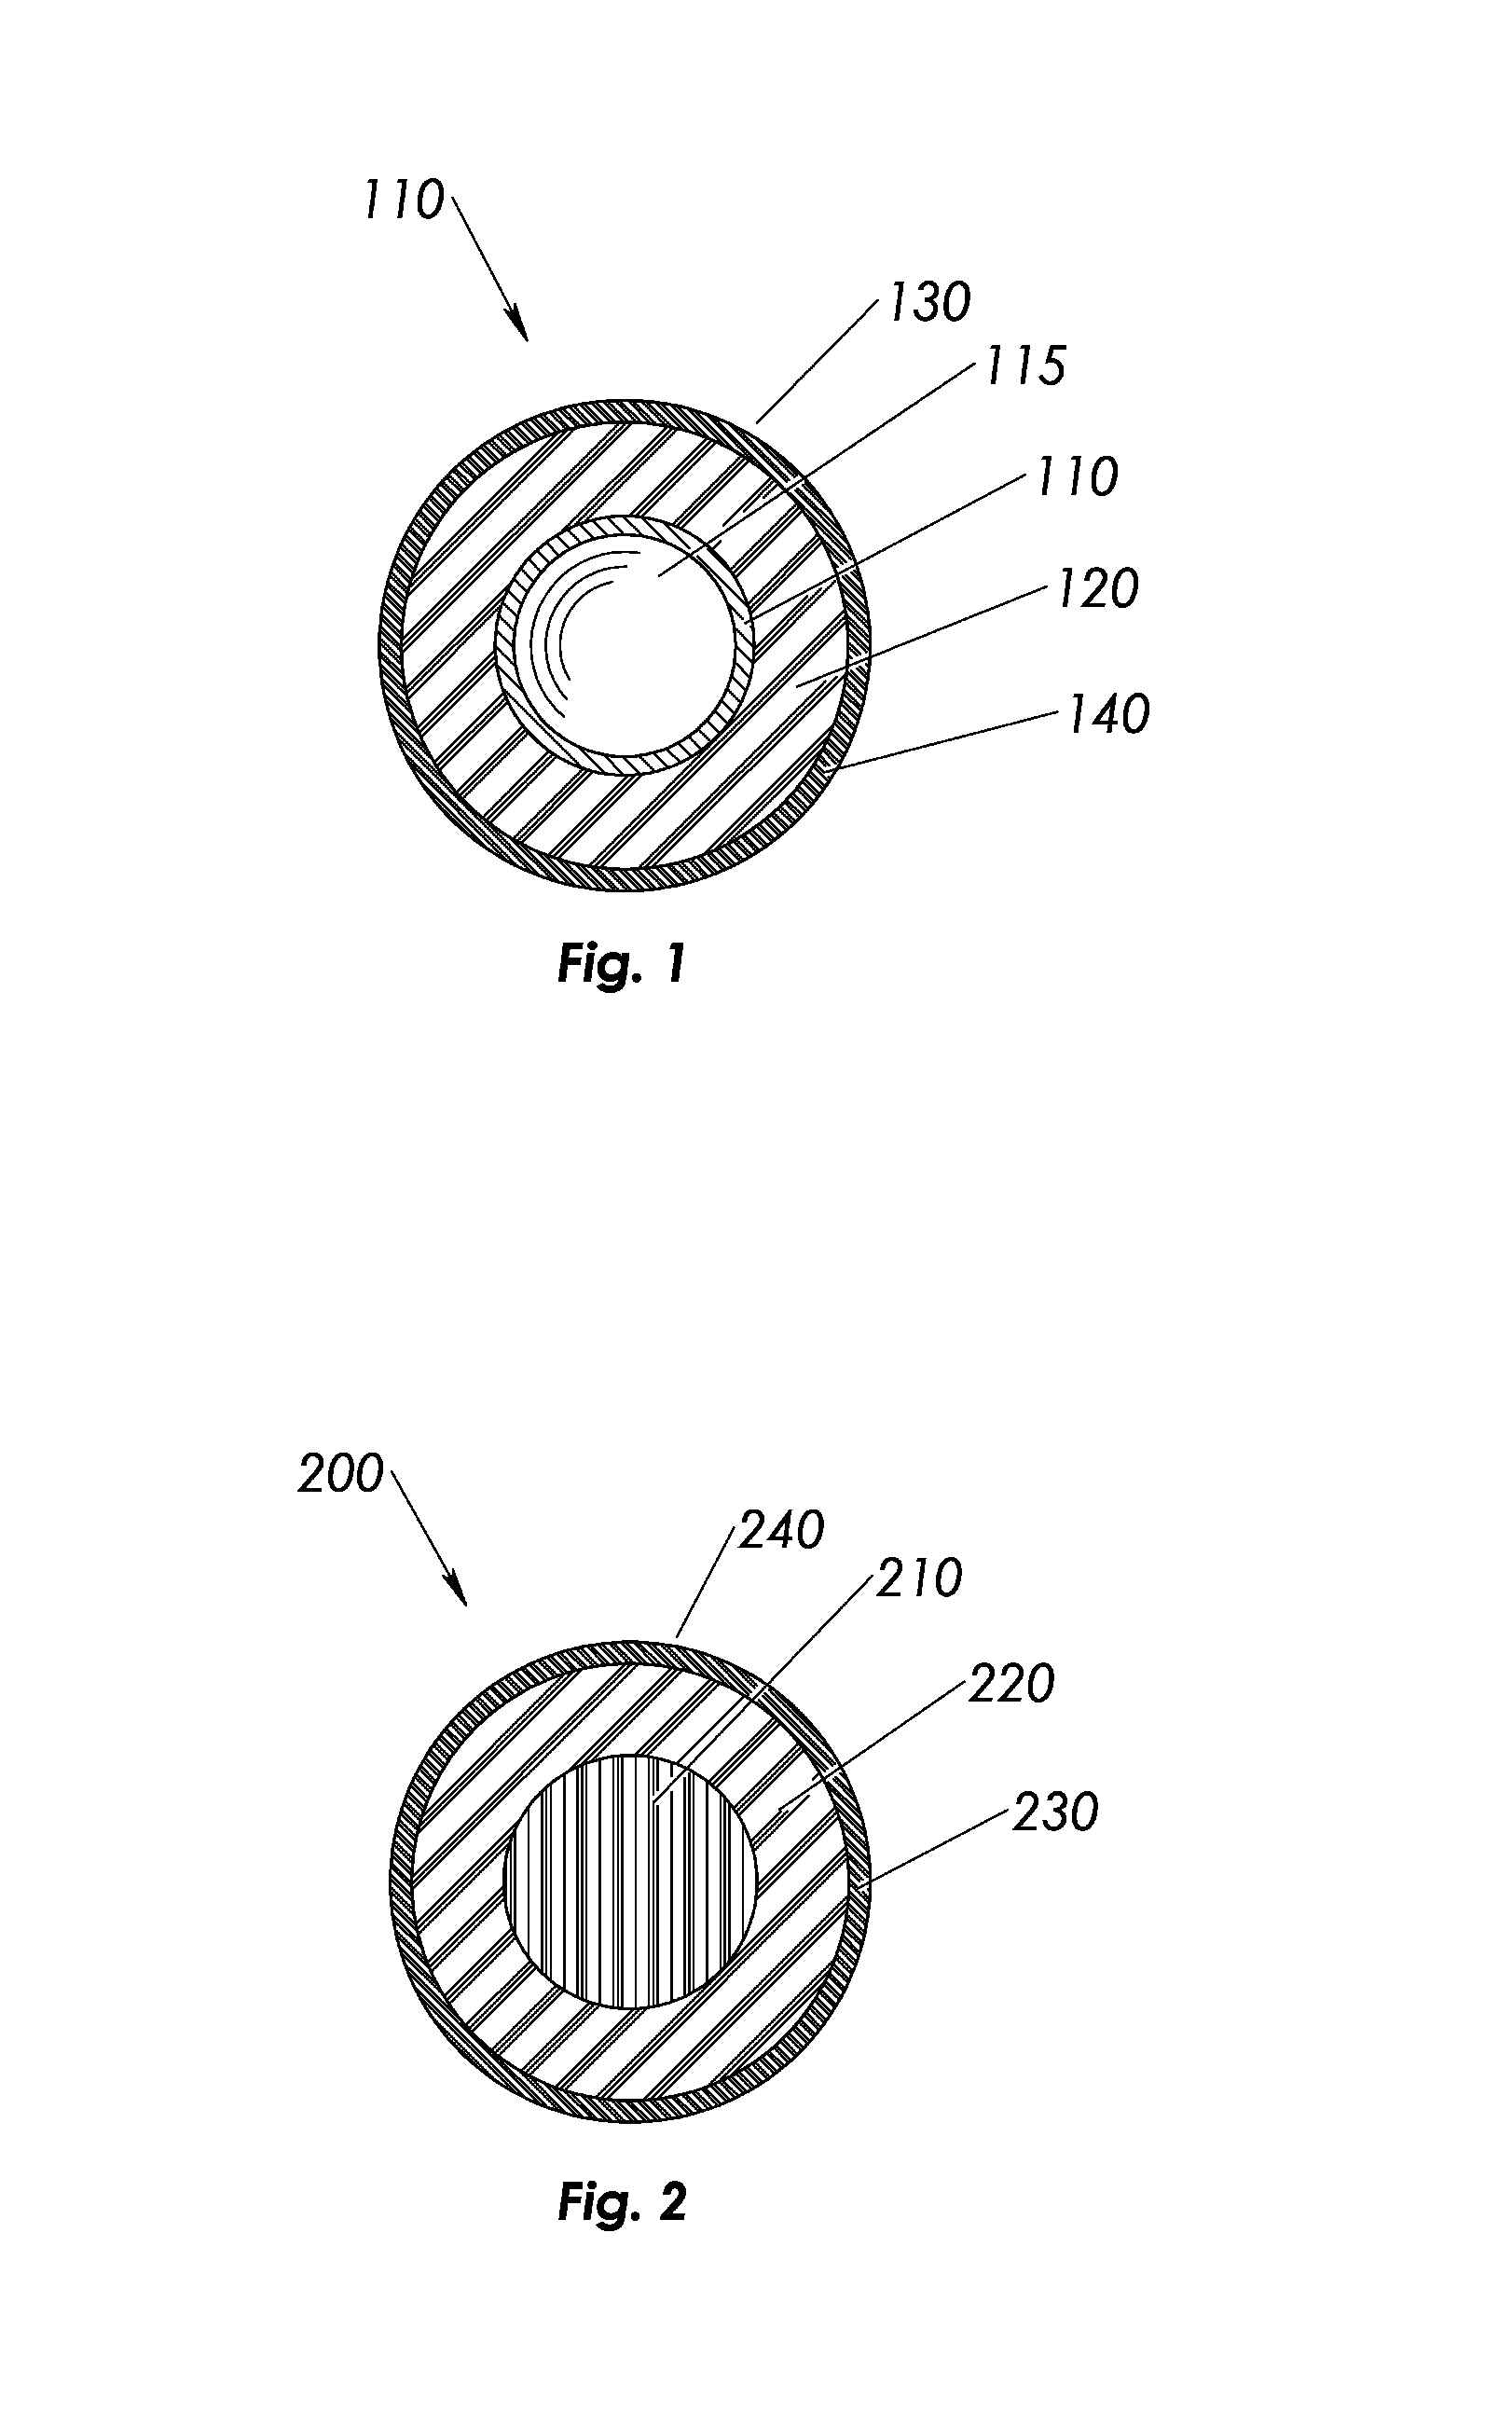 Thermoplastic elastomer composites for stiff core golf balls and method for making same